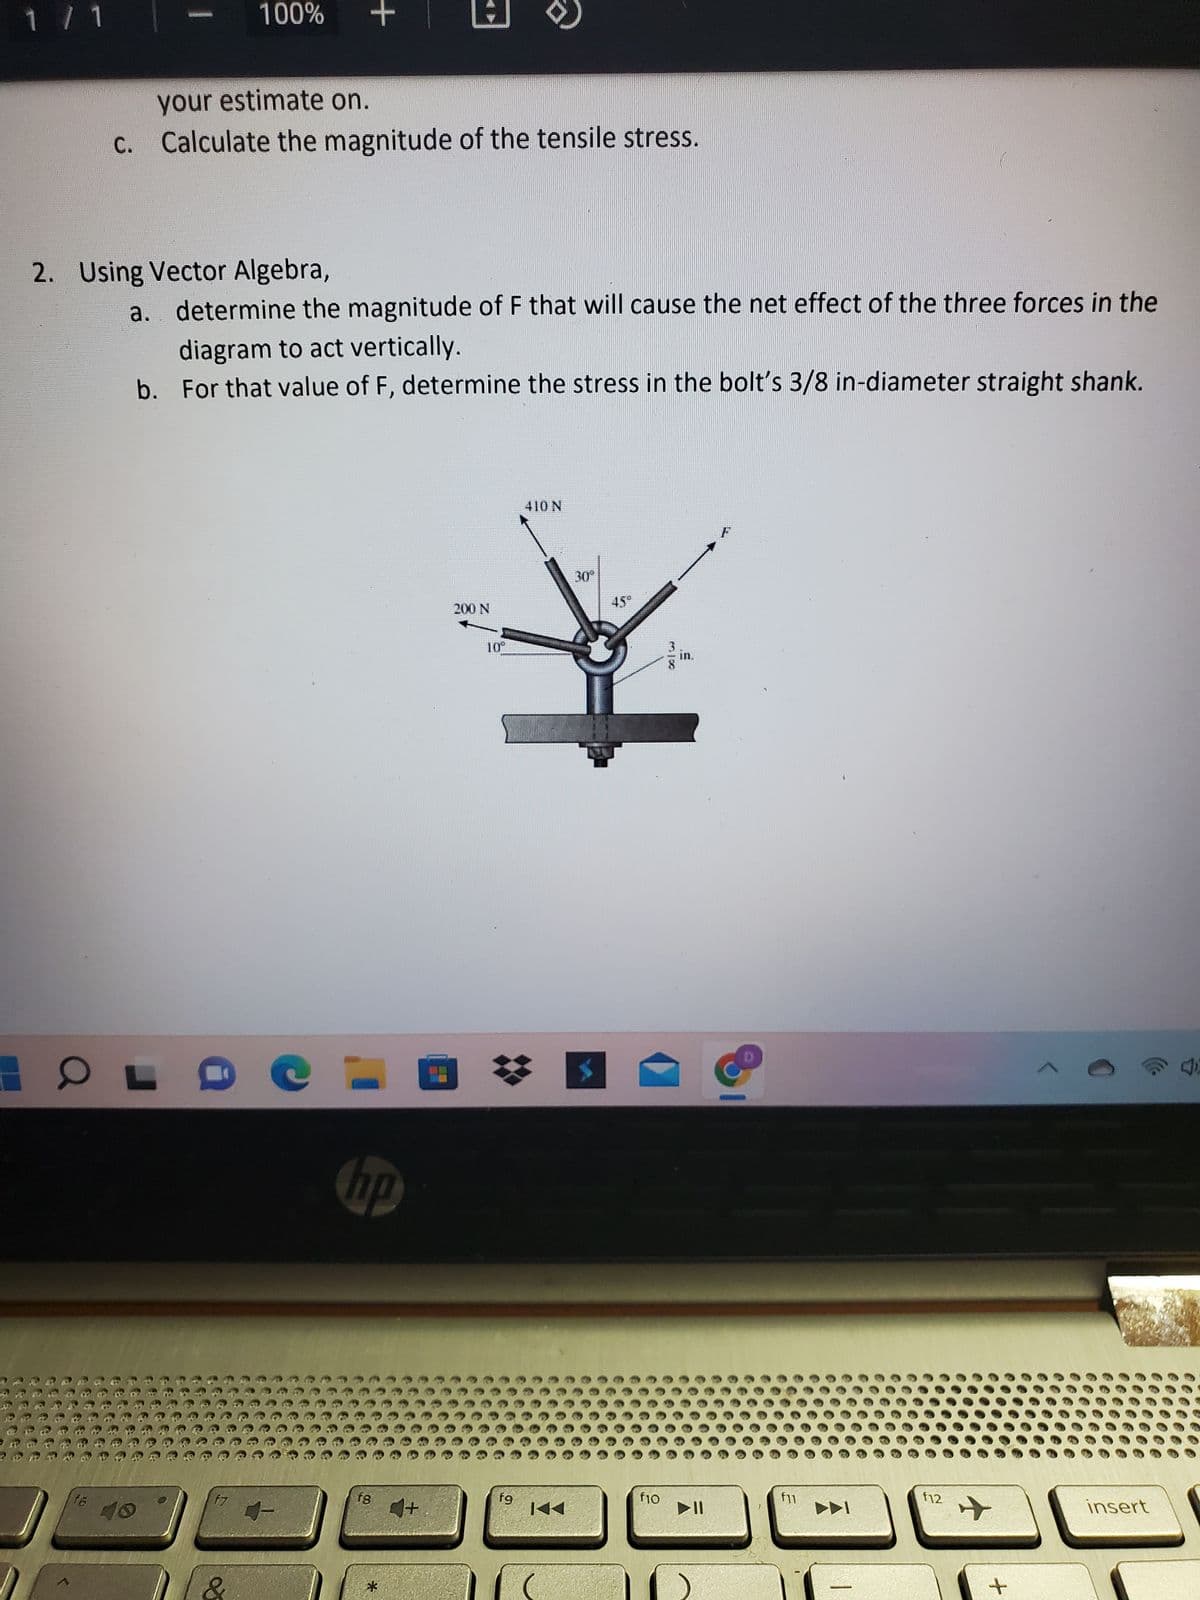 1 / 1
100%
your estimate on.
c. Calculate the magnitude of the tensile stress.
OL
+
2. Using Vector Algebra,
a. determine the magnitude of F that will cause the net effect of the three forces in the
diagram to act vertically.
b.
For that value of F, determine the stress in the bolt's 3/8 in-diameter straight shank.
f7
hp
18
1+
200 N
fg
410 N
KA
30°
f10
* w
▶11
f11
►
f12
+
+
insert
40